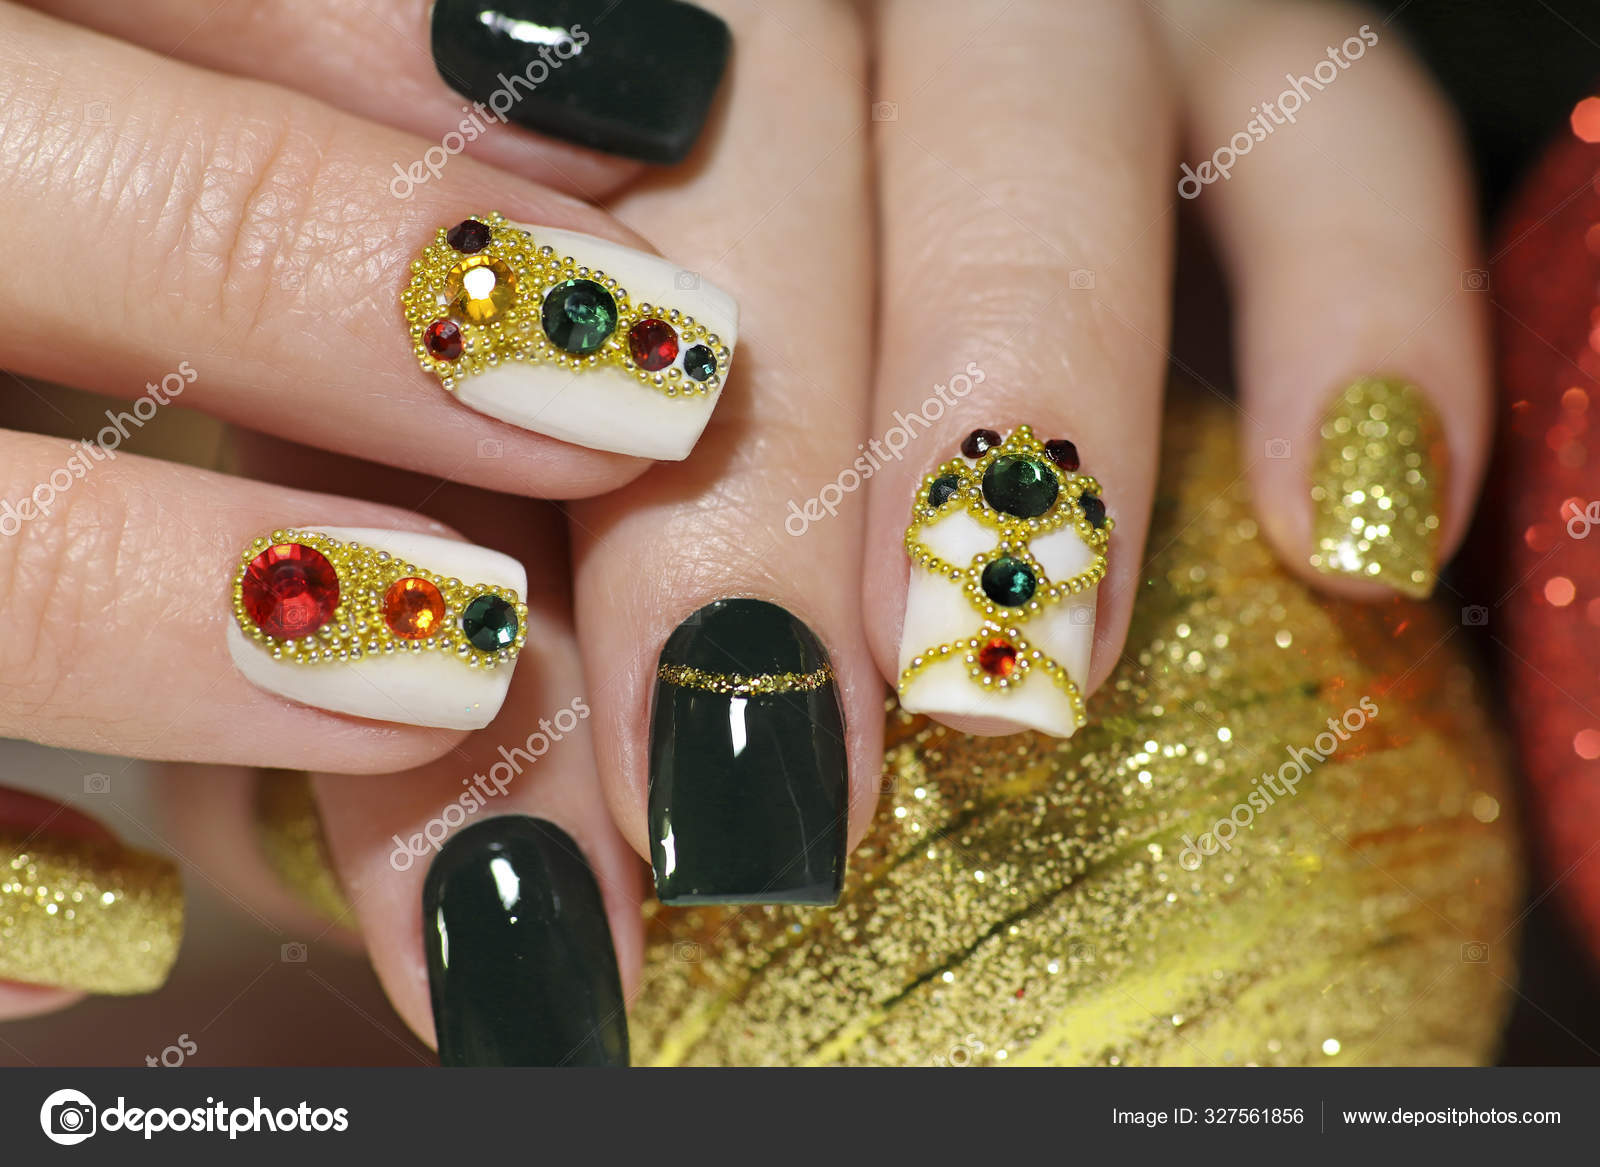 Premium Photo | A green and gold nail art design with gold leaves